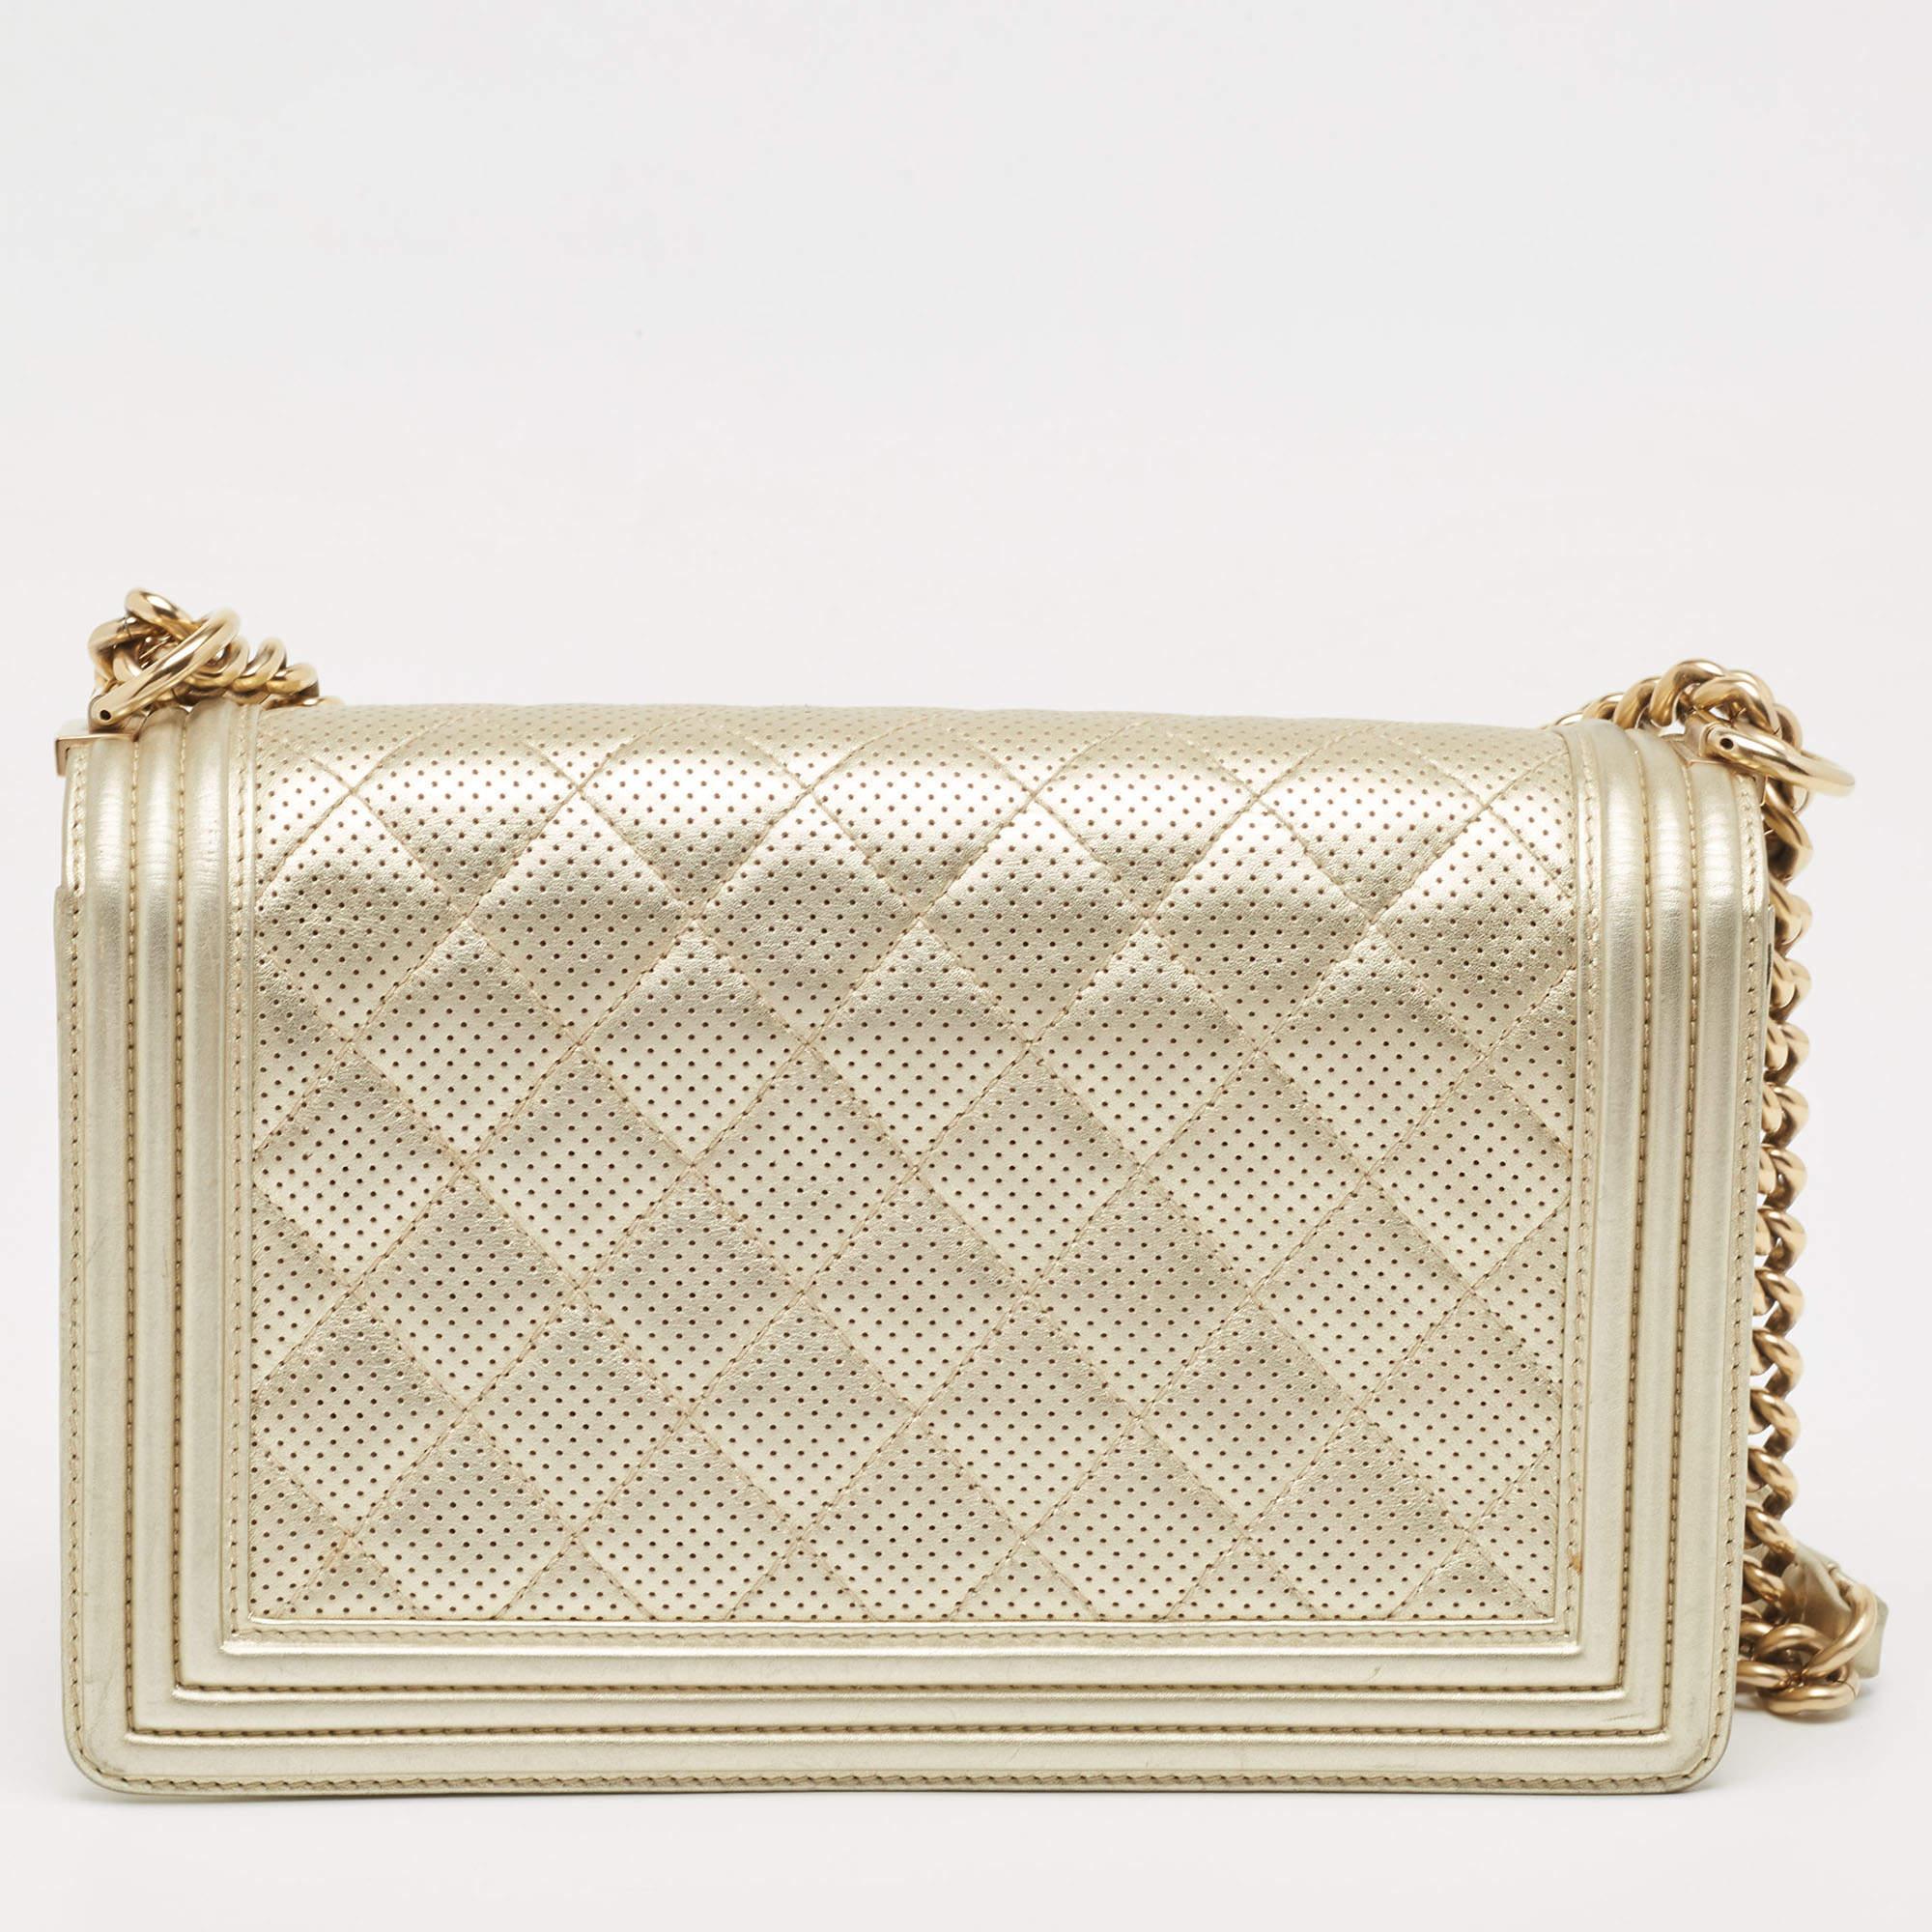 The Chanel New Medium Boy Bag exudes timeless elegance with its light gold hue and meticulously stitched quilted leather. The iconic Boy bag design features a gold-tone chain strap and the distinctive Boy clasp, making it a luxurious and stylish